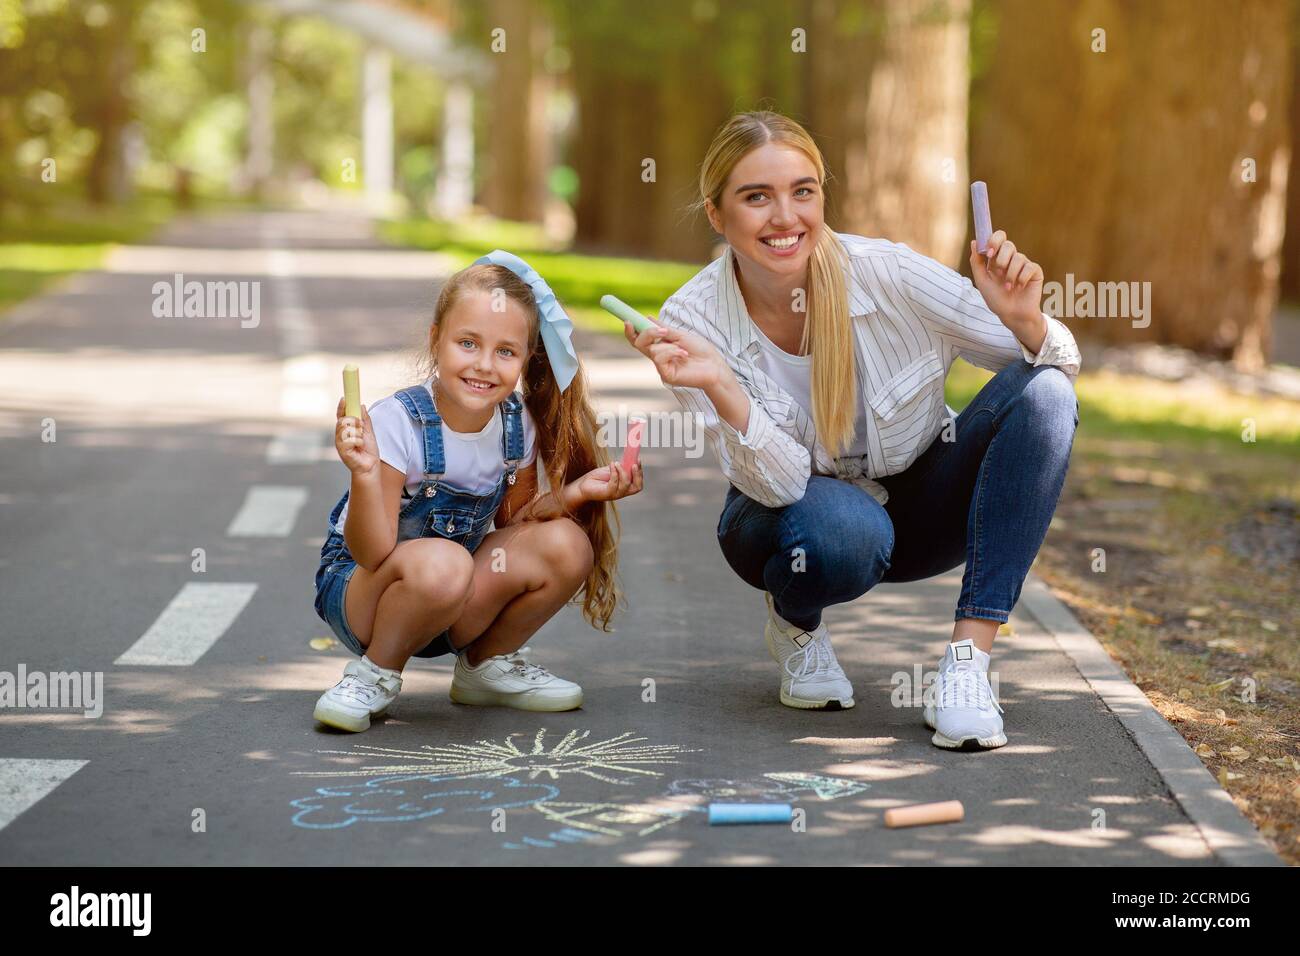 Happy Mom And Daughter Holding Colorful Chalks Drawing In Park Stock Photo